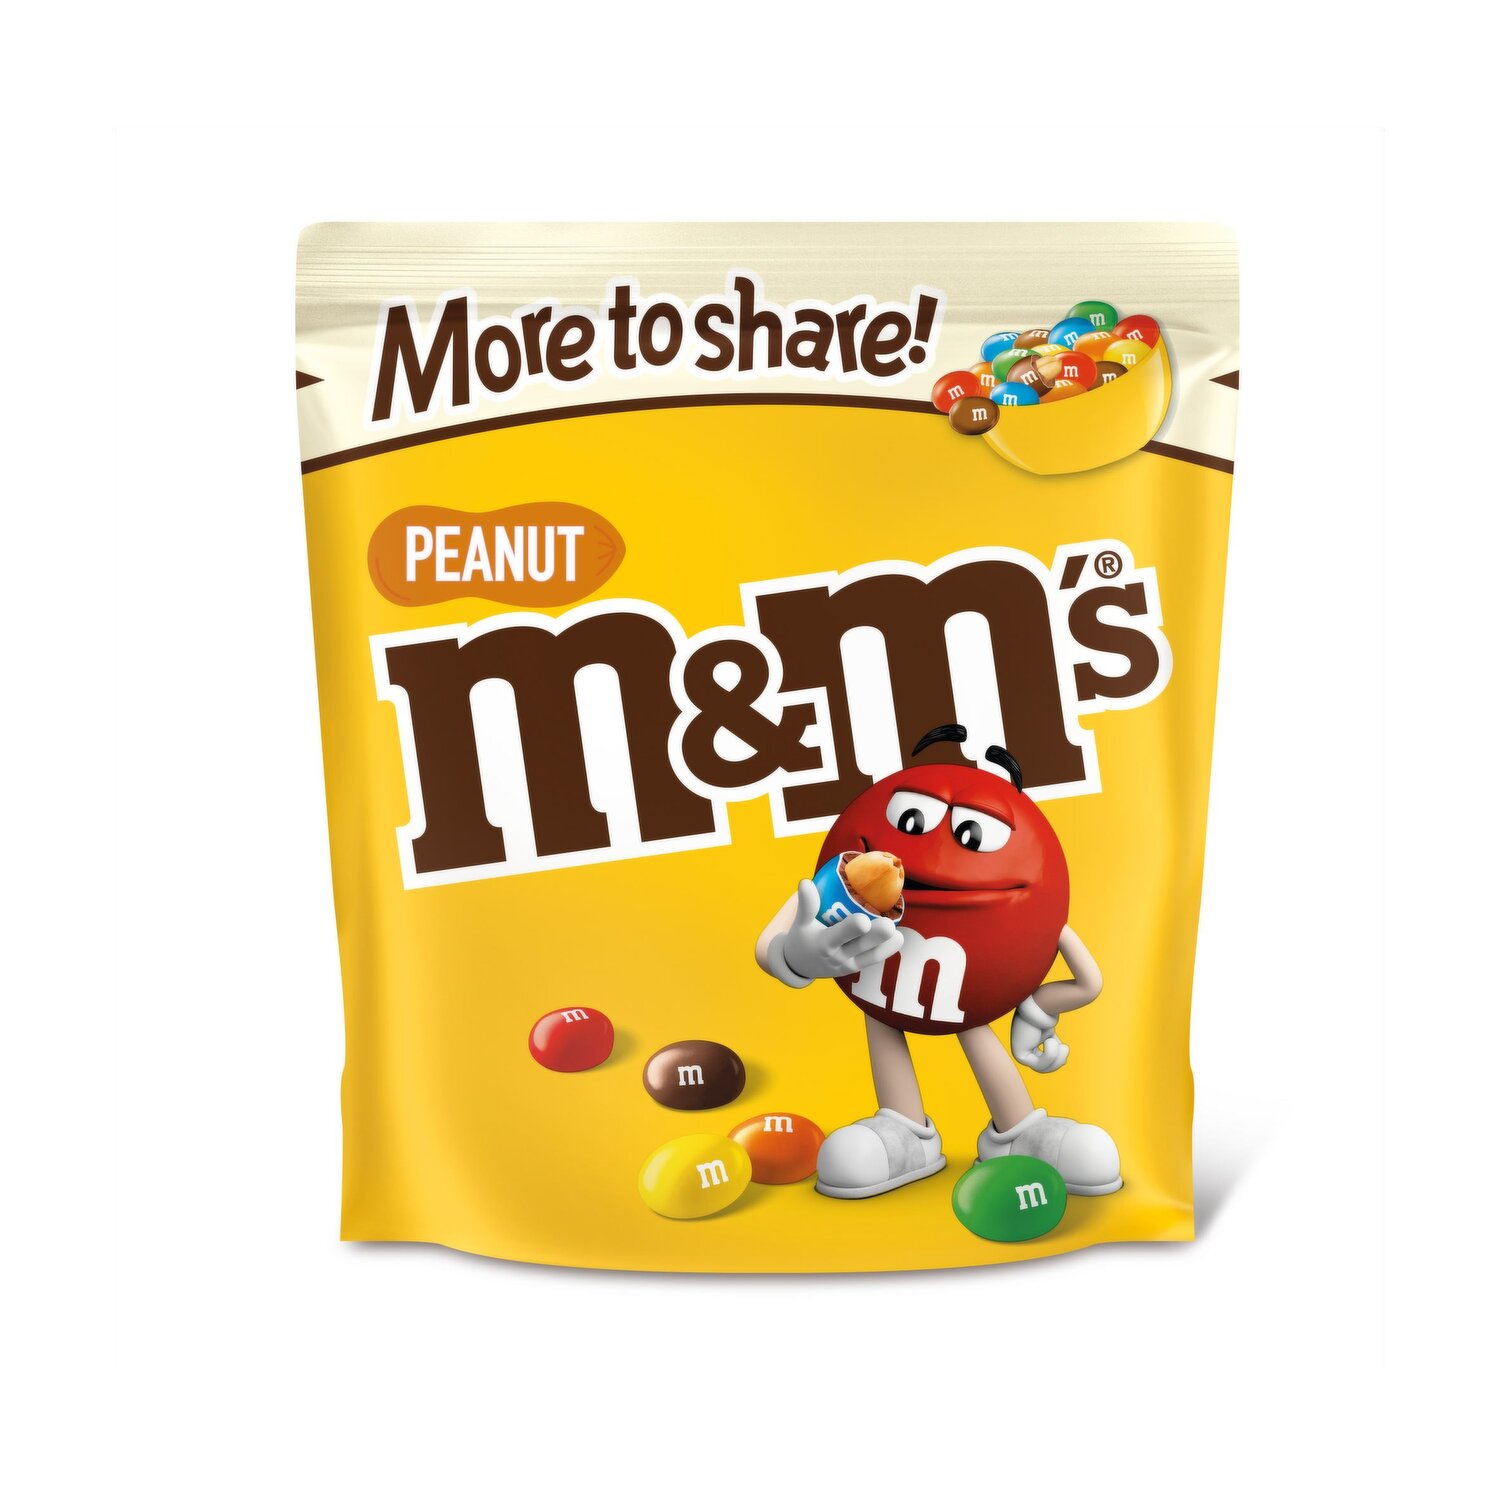 10 ways to have more money - ▻ Peanut M&Ms - 1KG Bags £2.50 at Tesco & £3  in Morrisons (in-store only)